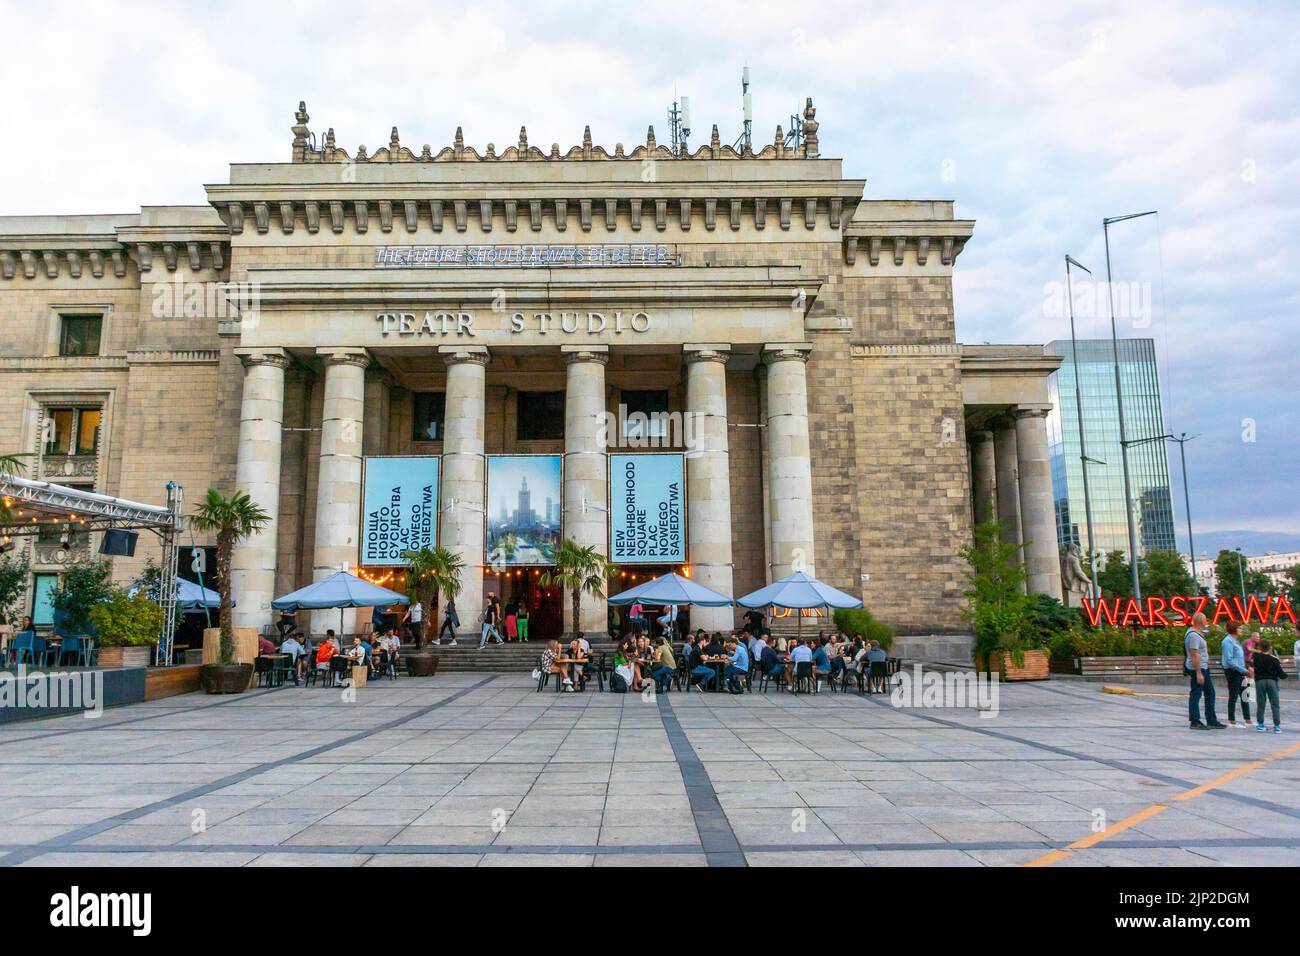 Warsaw, Poland, Cafe Terrace at Palace of Culture and Science Stock Photo